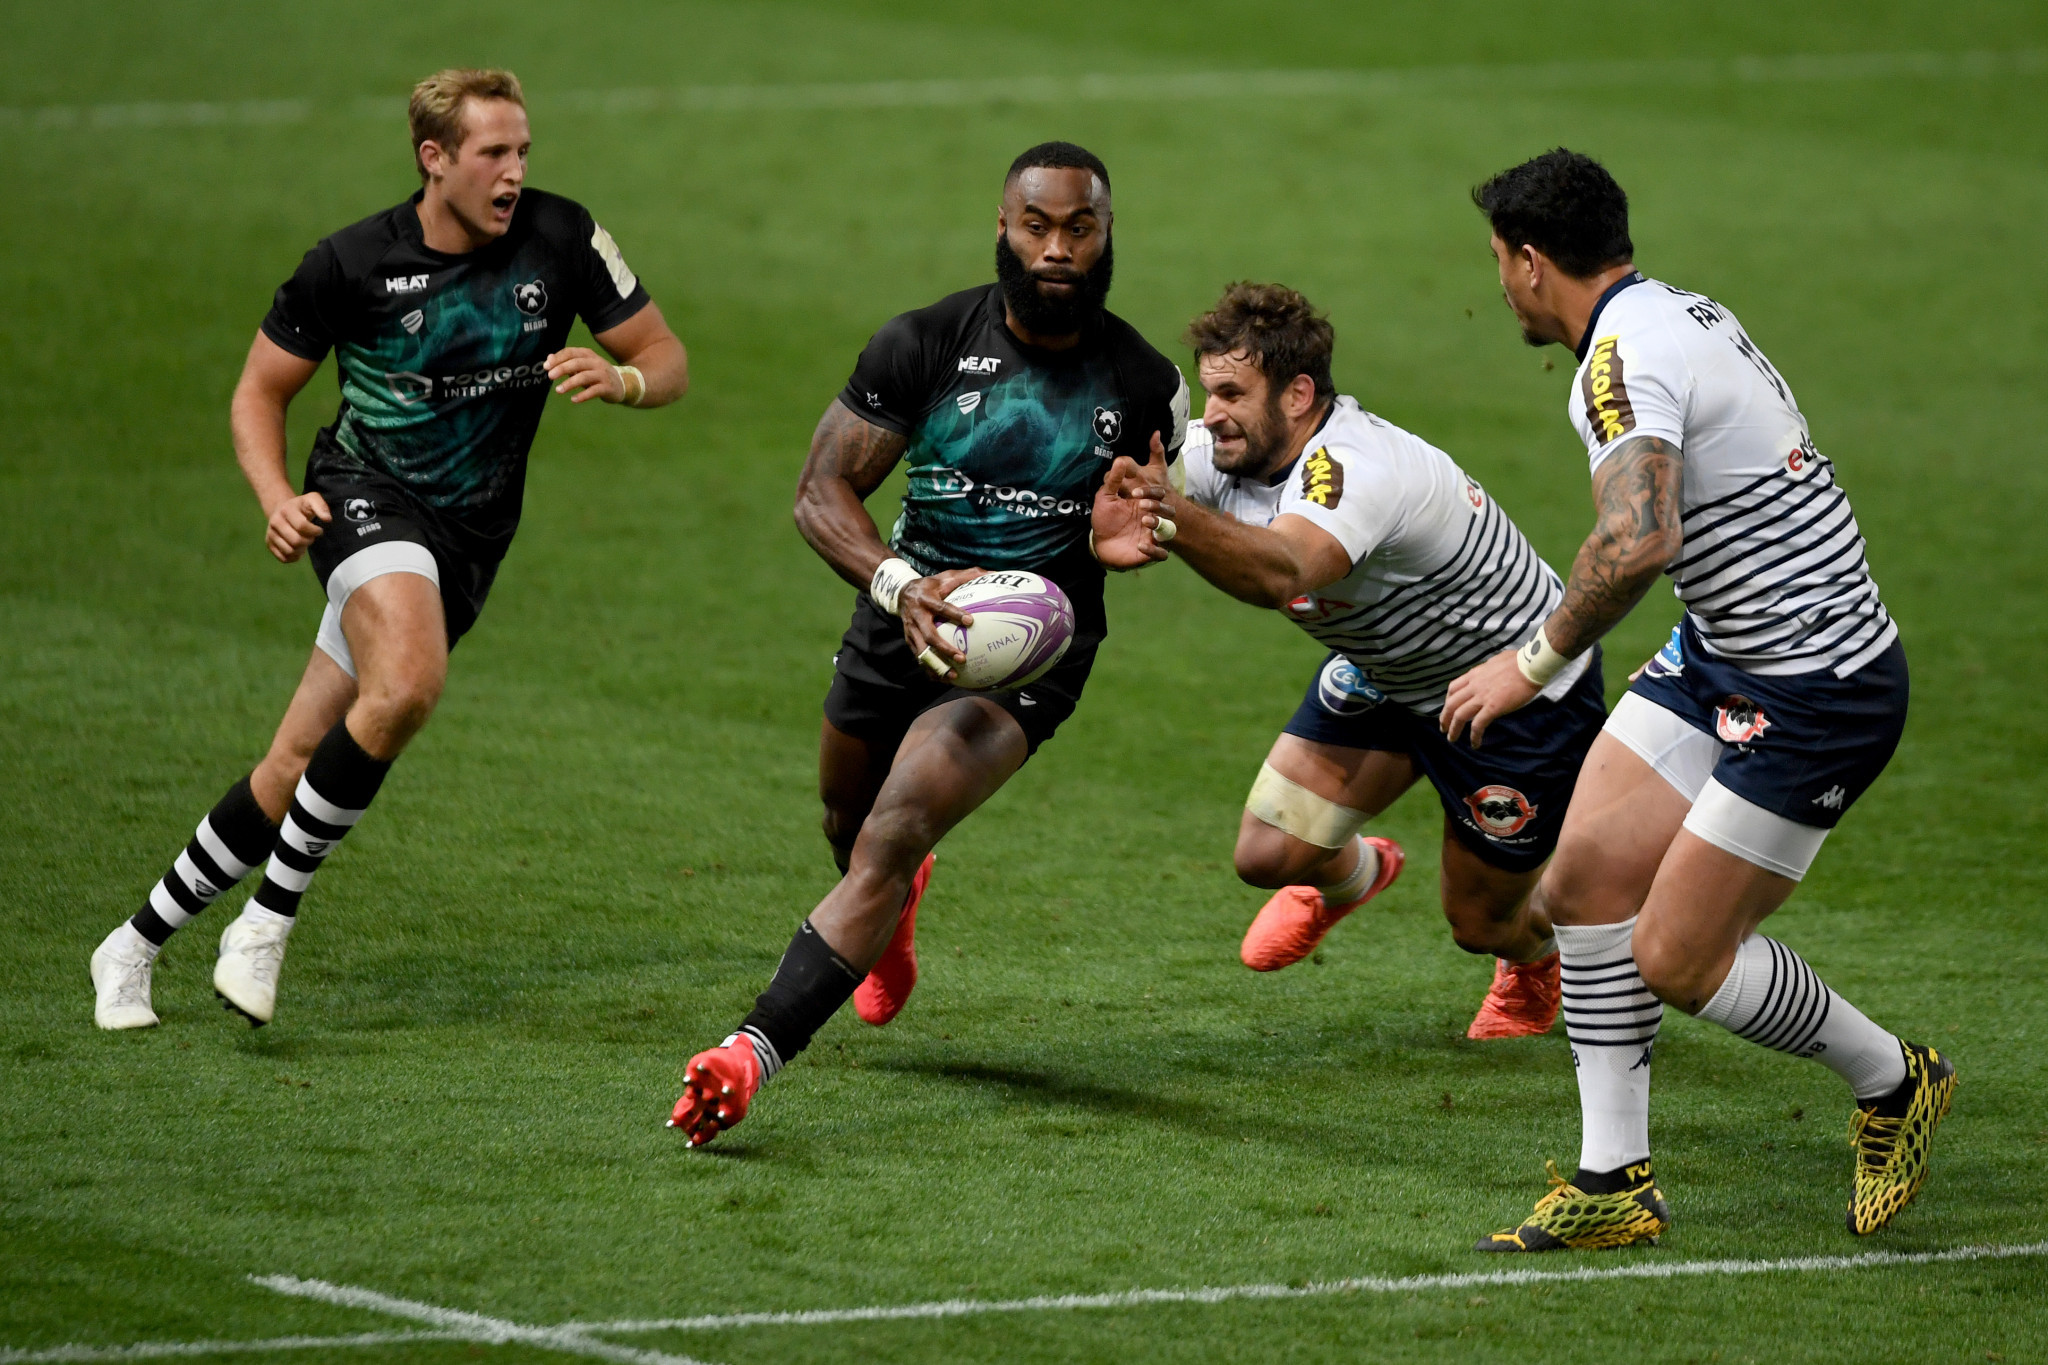 Bristol Bears star Semi Radradra has proven to be hard to stop in the Gallagher Premiership ©Getty Images